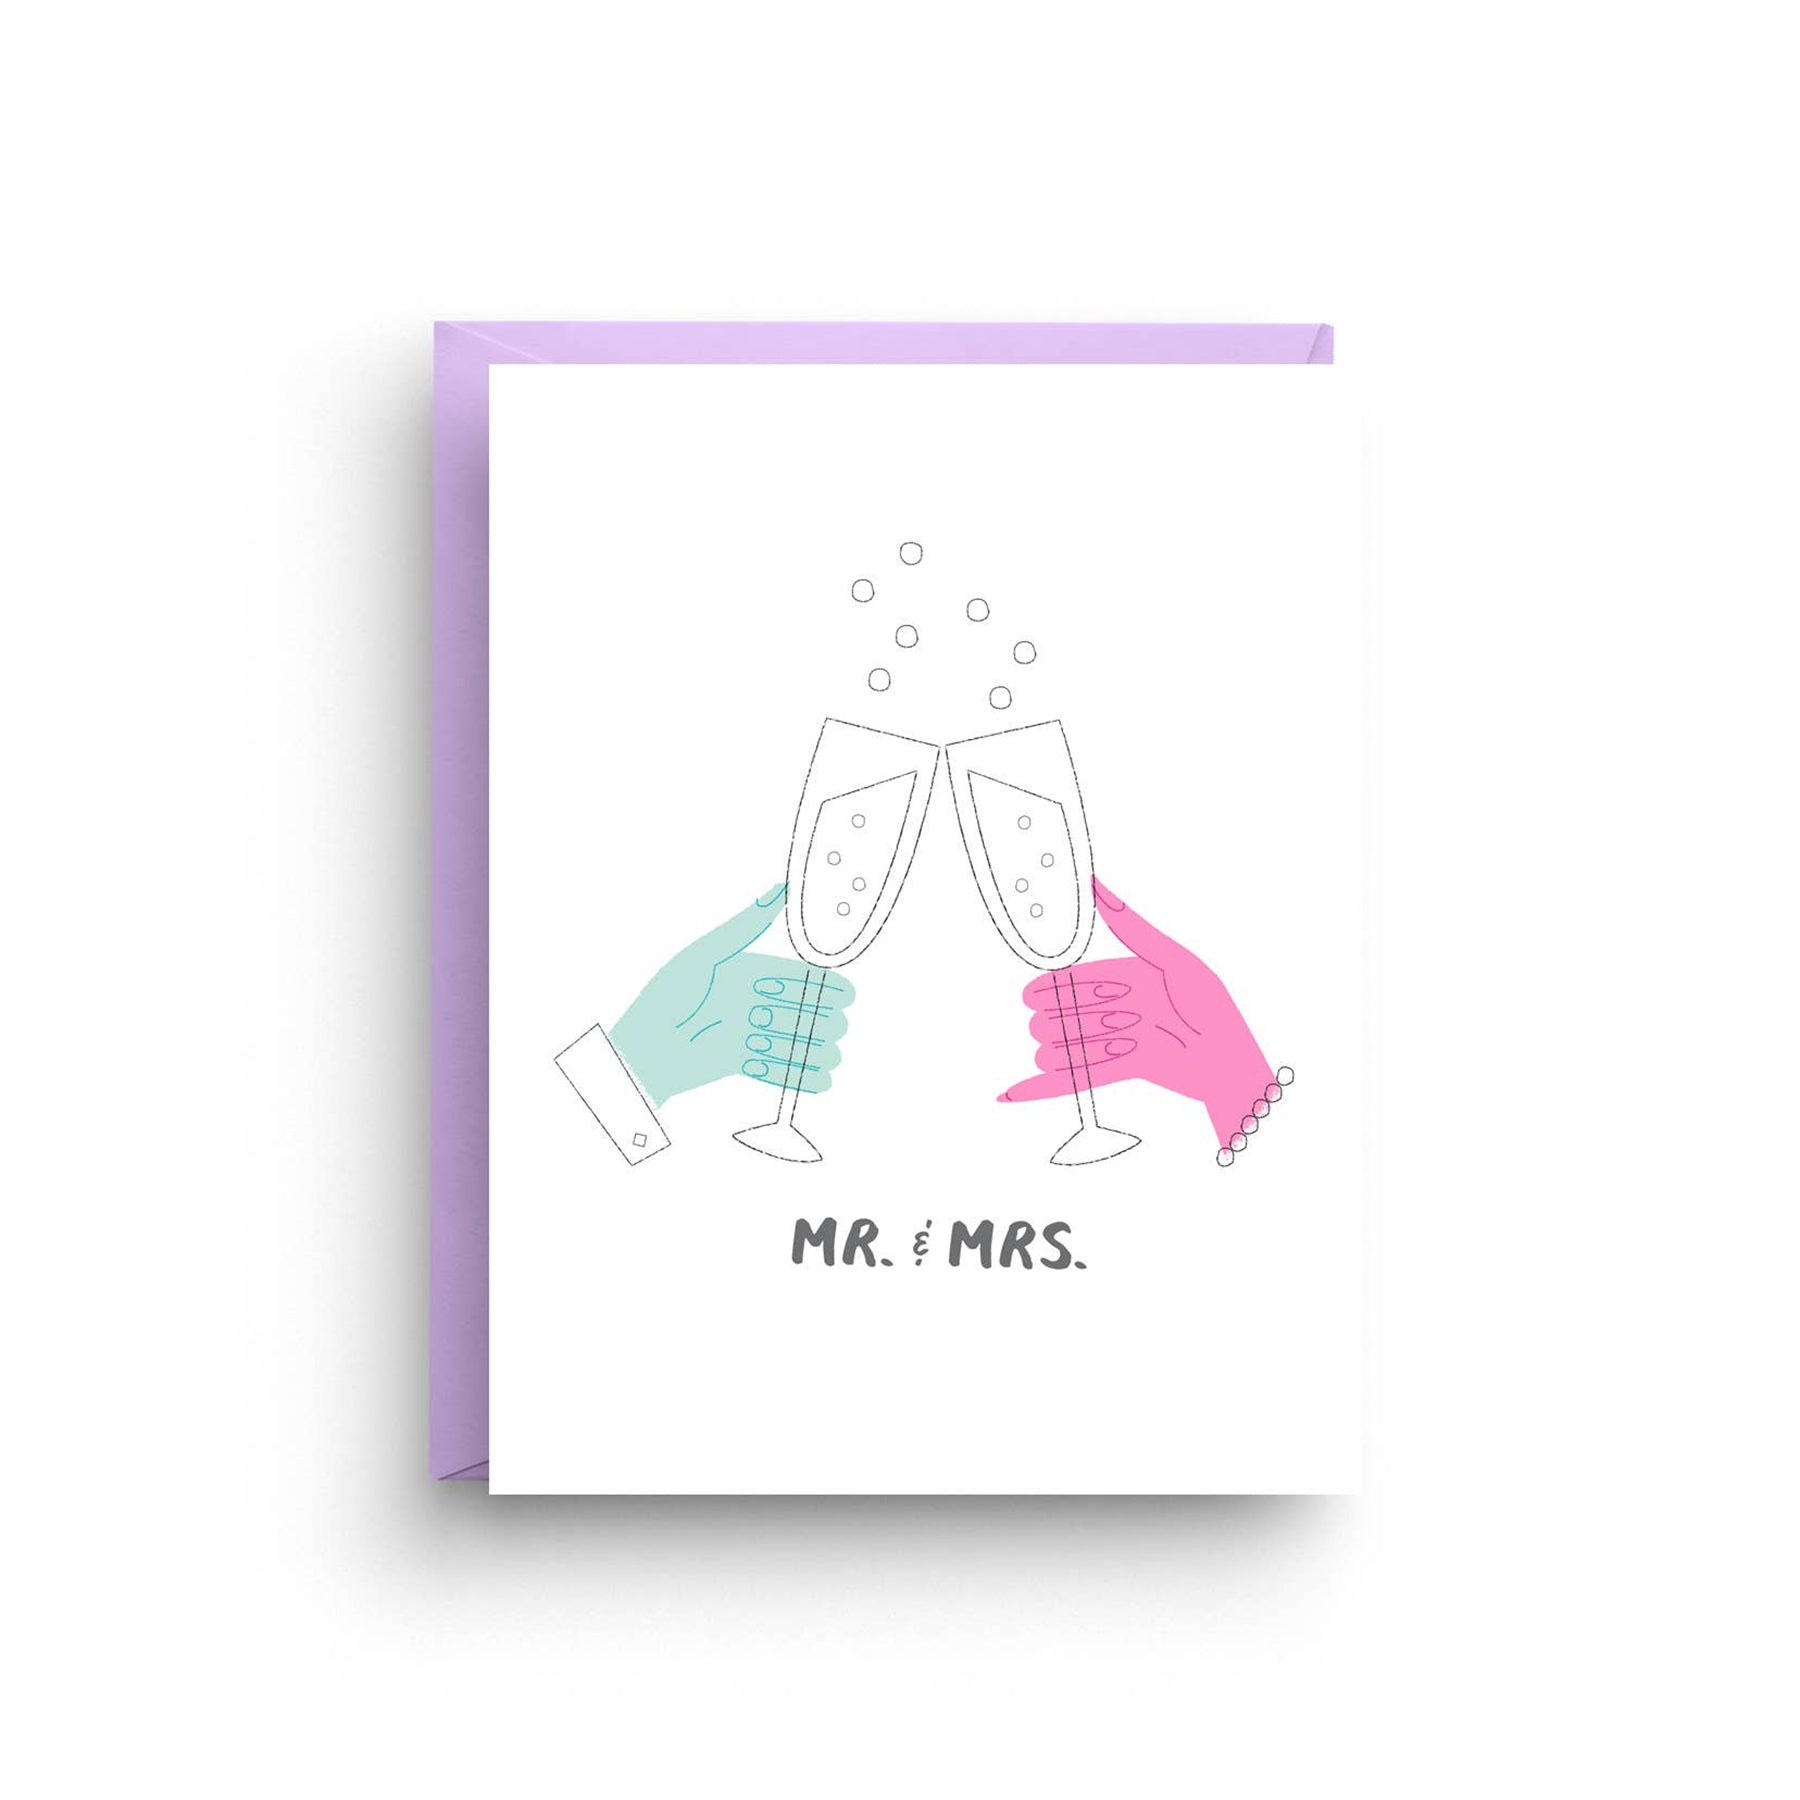 Mr. and Mrs. - Wedding Card